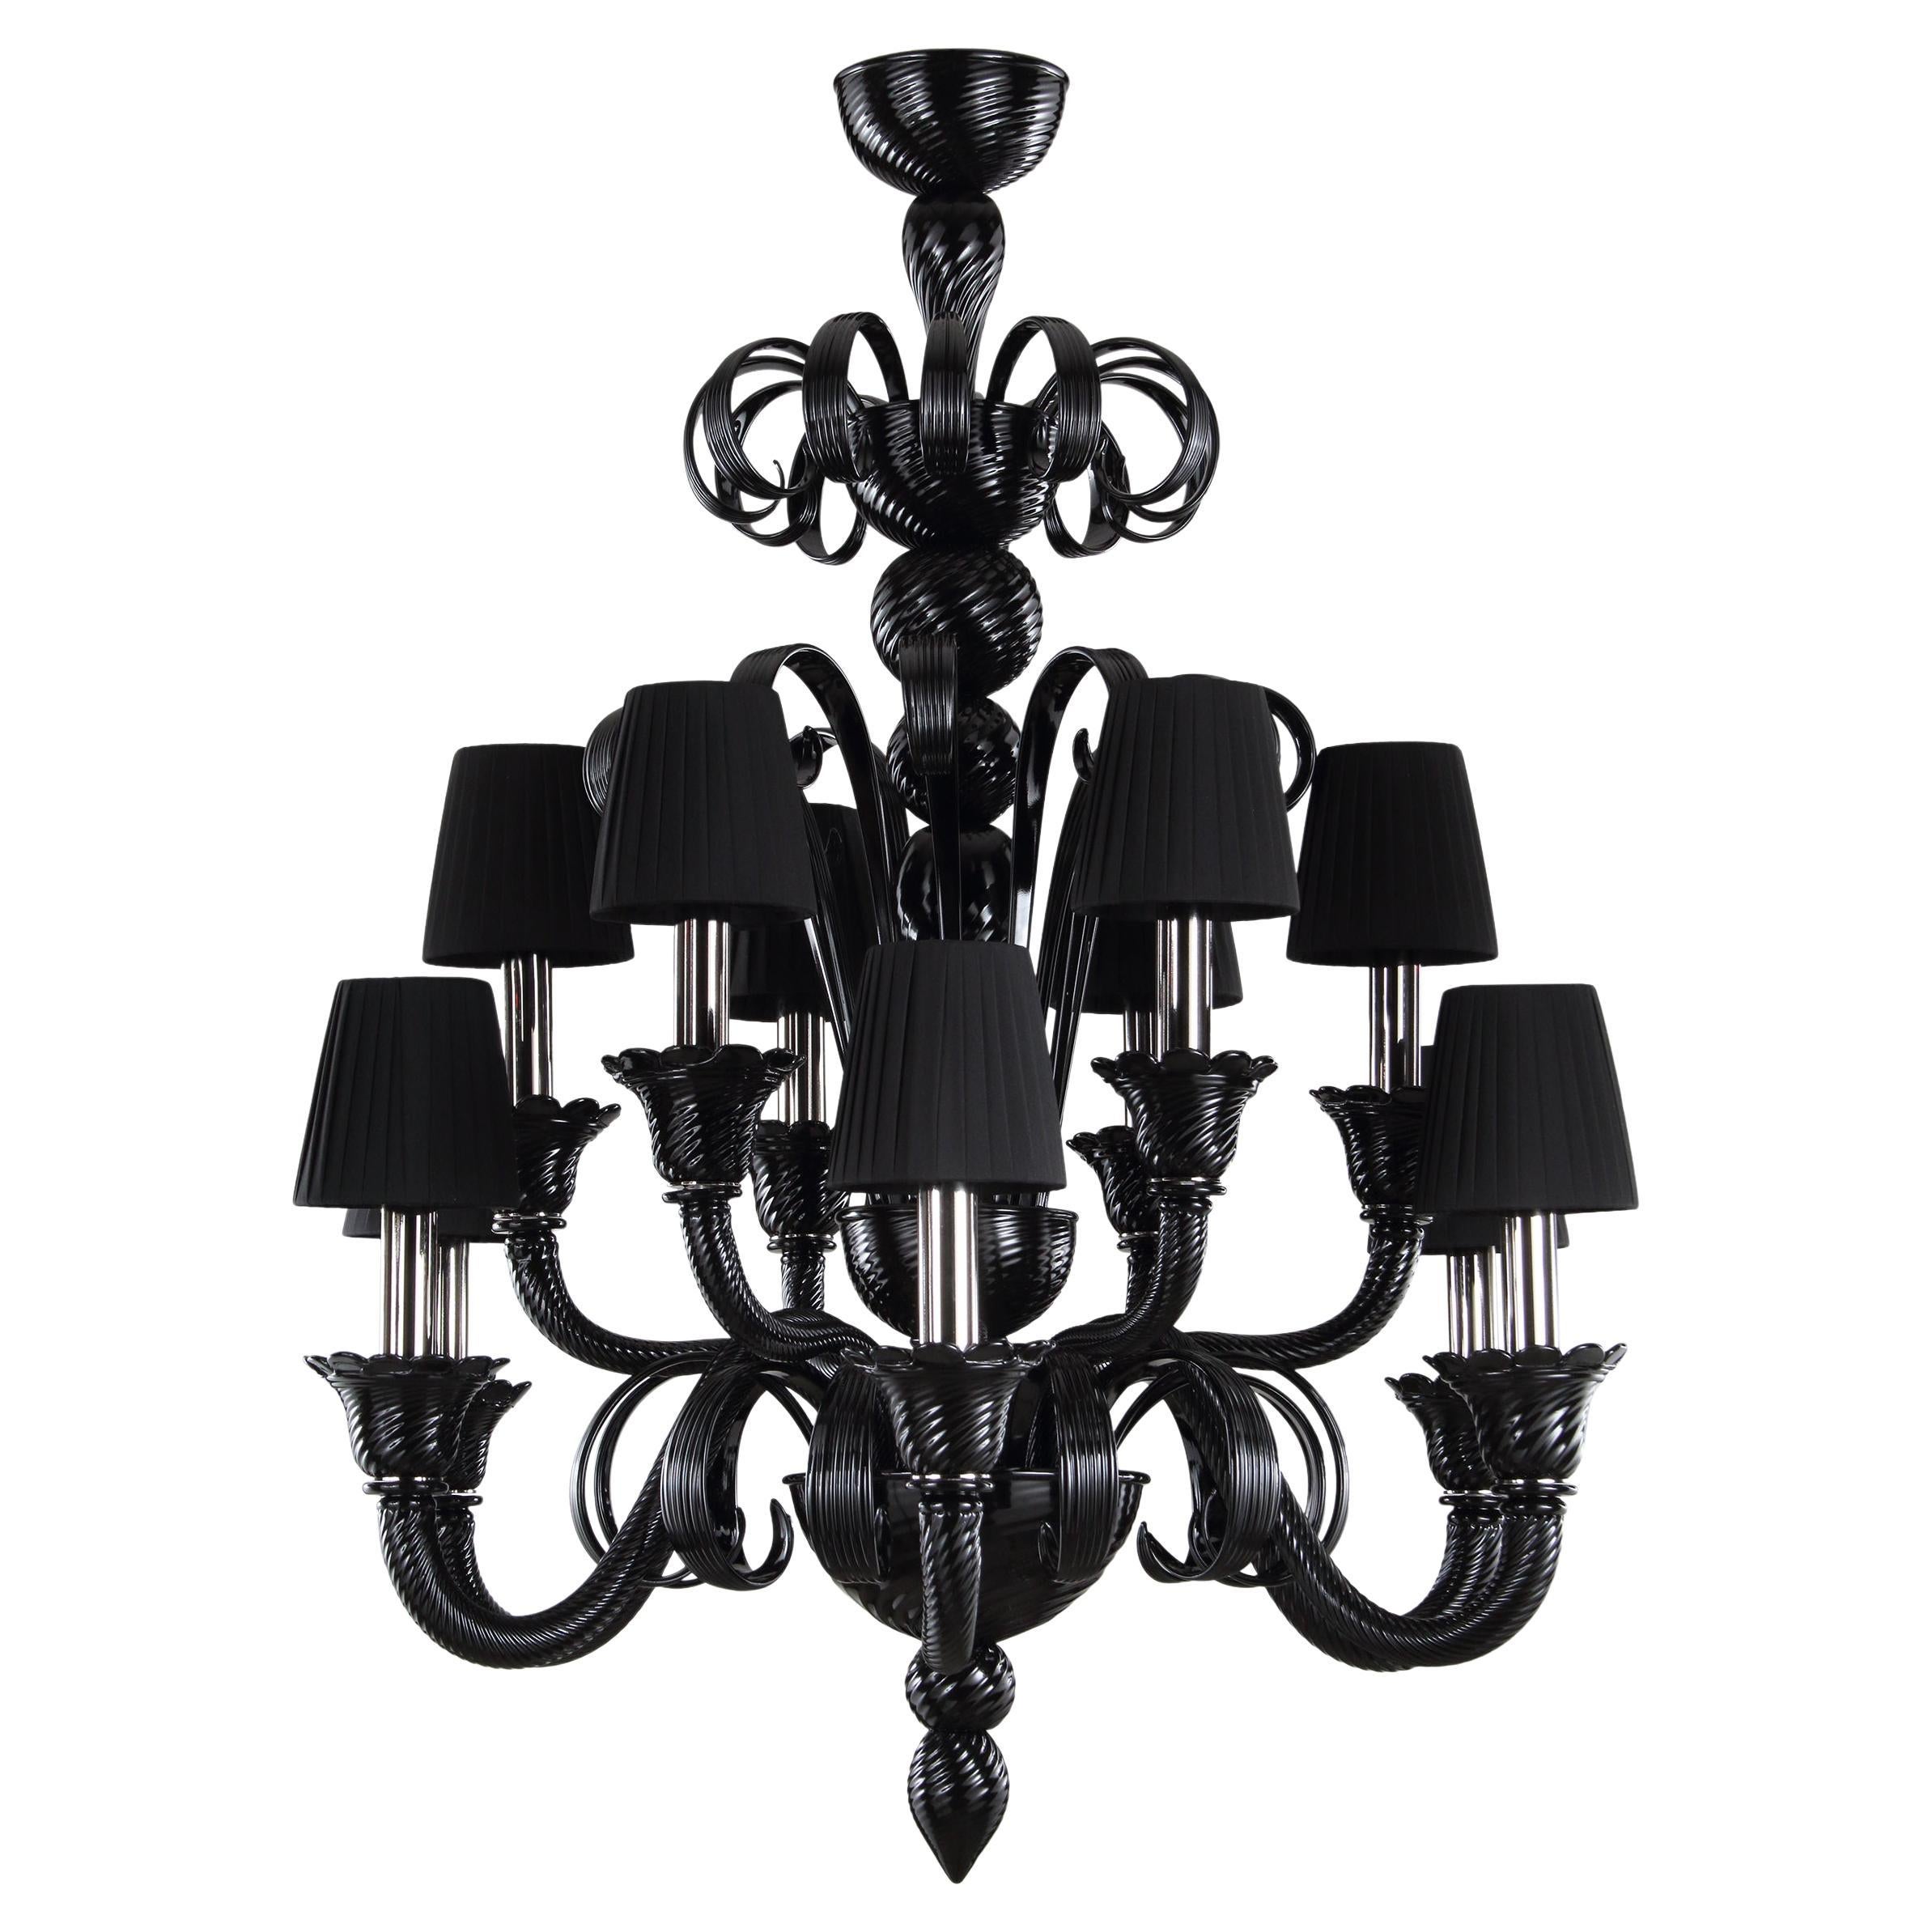 Artistic Chandelier 6+6 Arms Black Murano Glass, Lampshades IKO by Multiforme